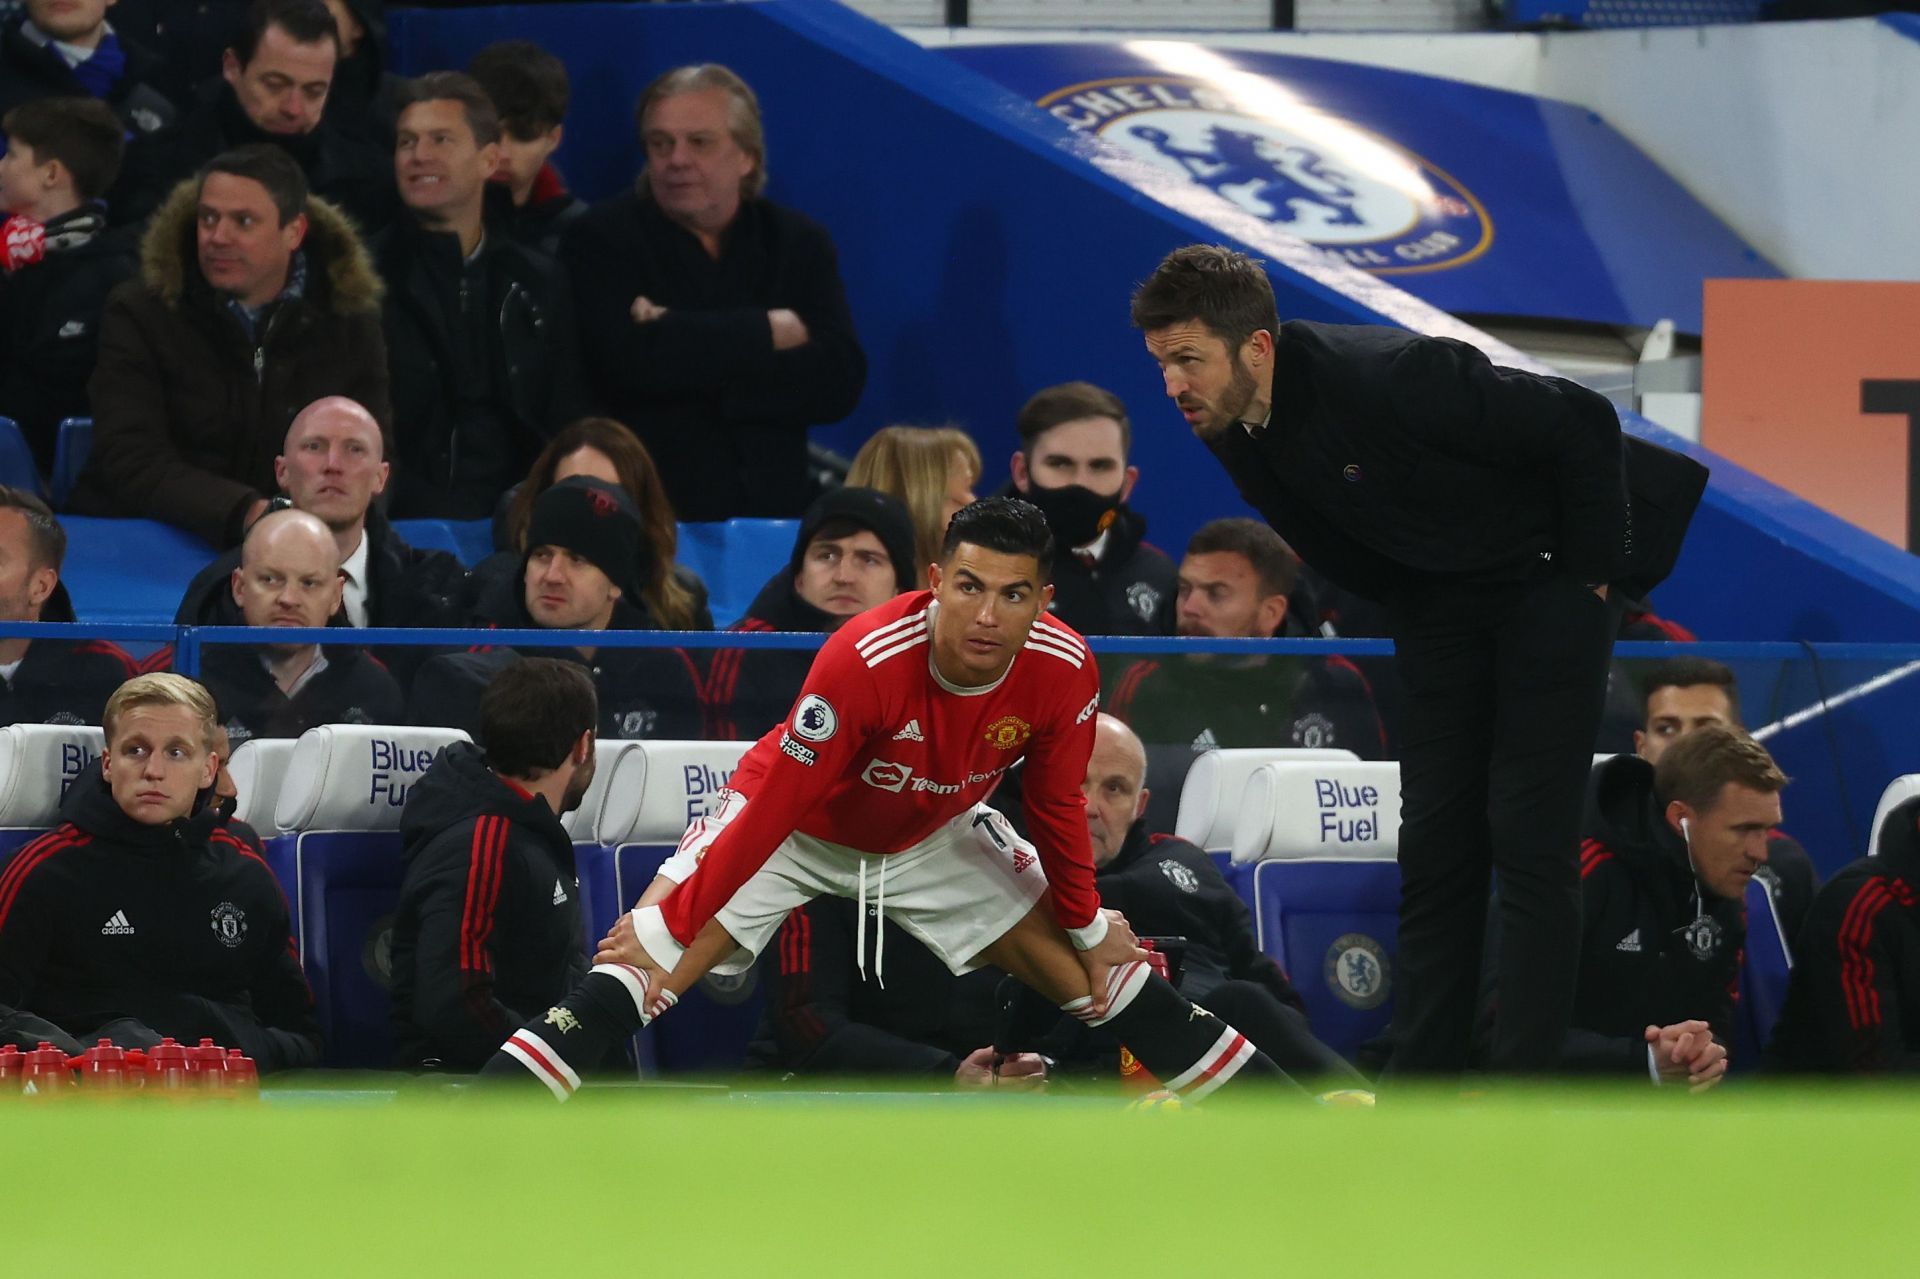 Cristiano Ronaldo started on the bench for Manchester United against Chelsea